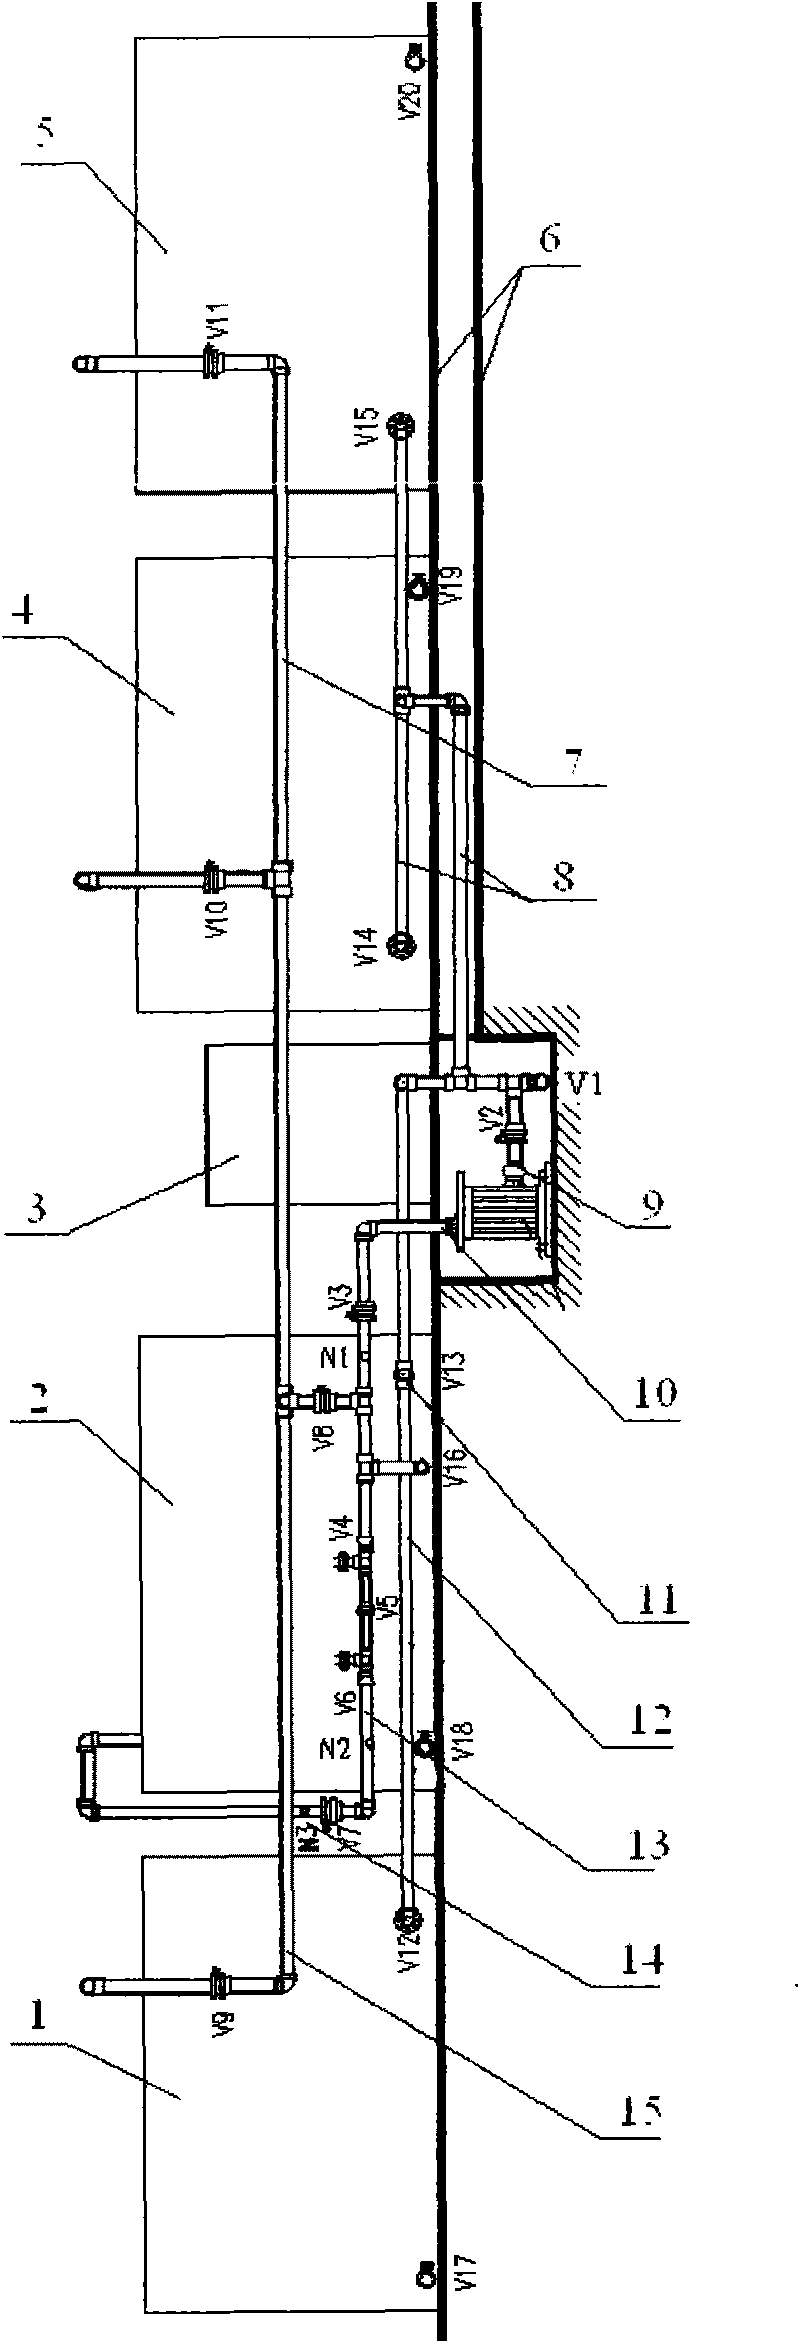 Device for simulating land-based test of ship ballast water treatment system